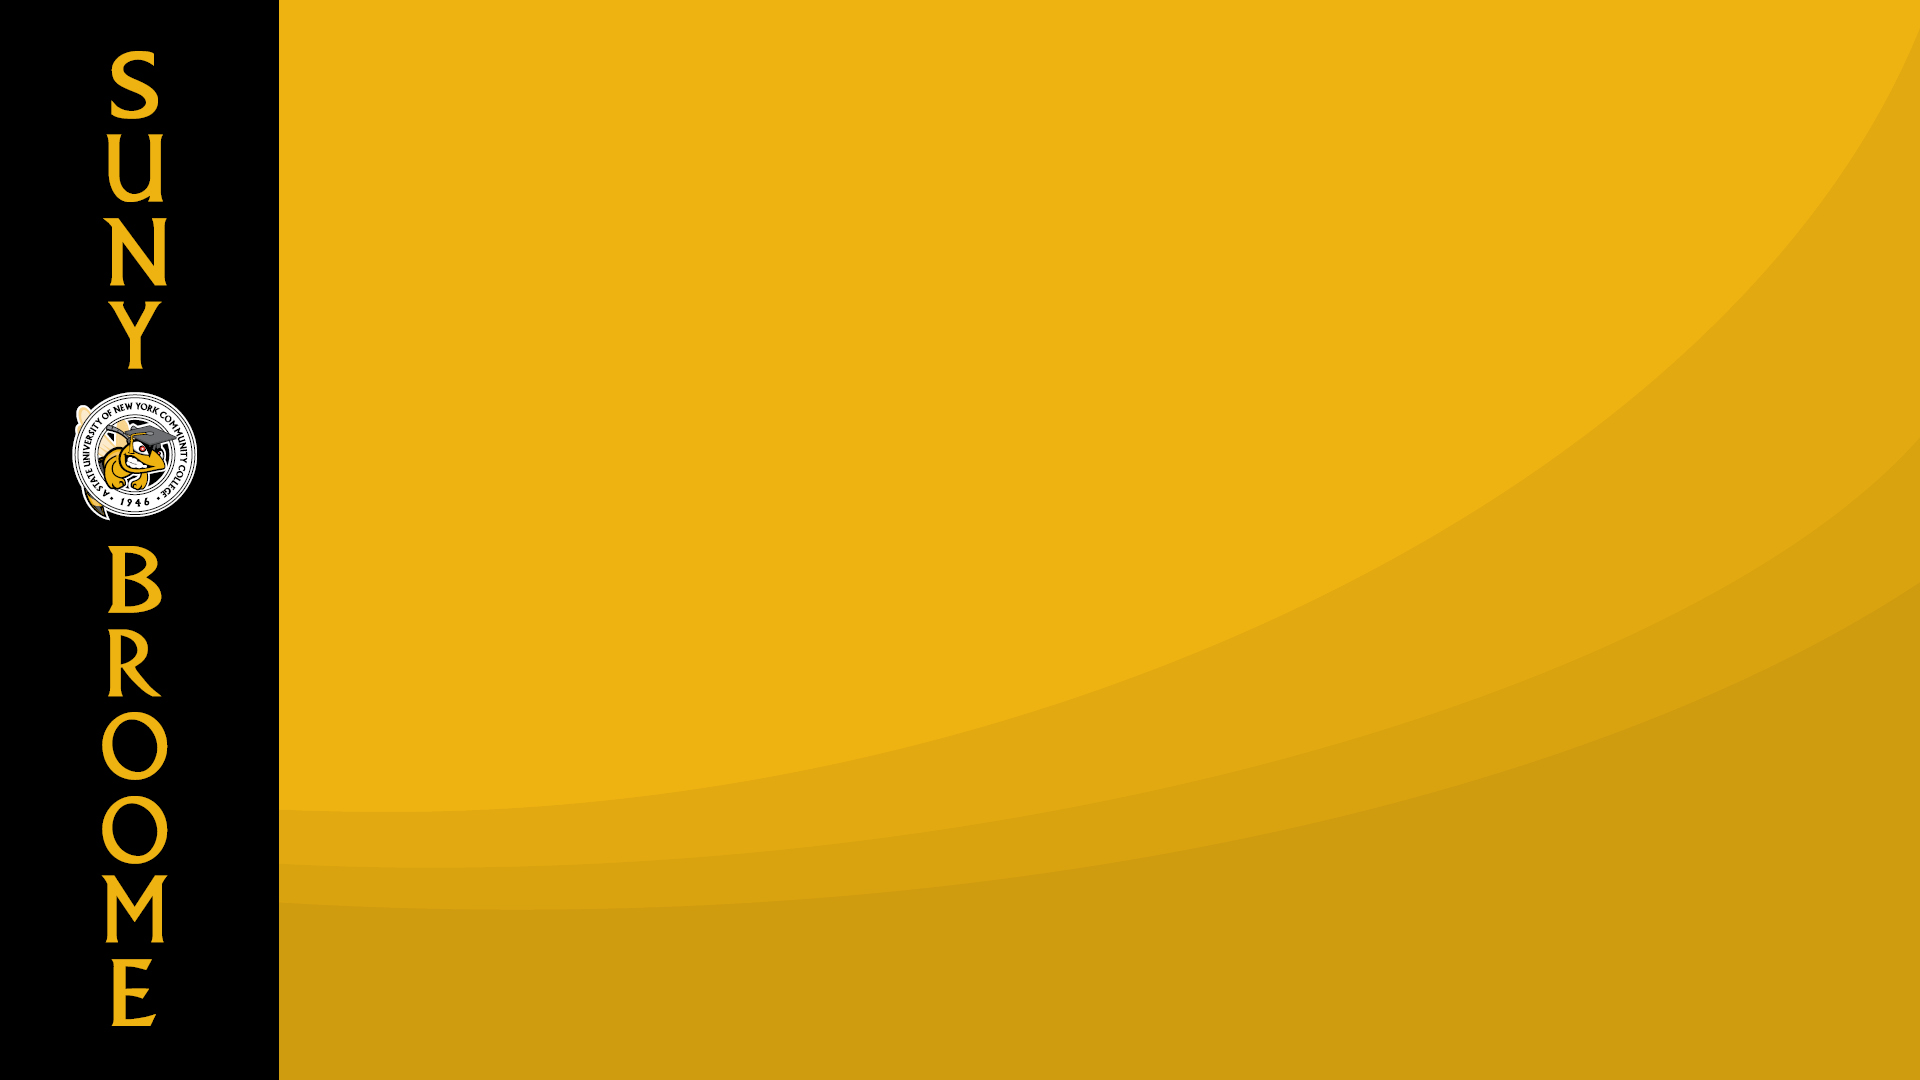 Download Zoom virtual background with SUNY Broome logo displayed vertically on left over a black stripe with abstract yellow background taking up majority of the visual space (jpg)